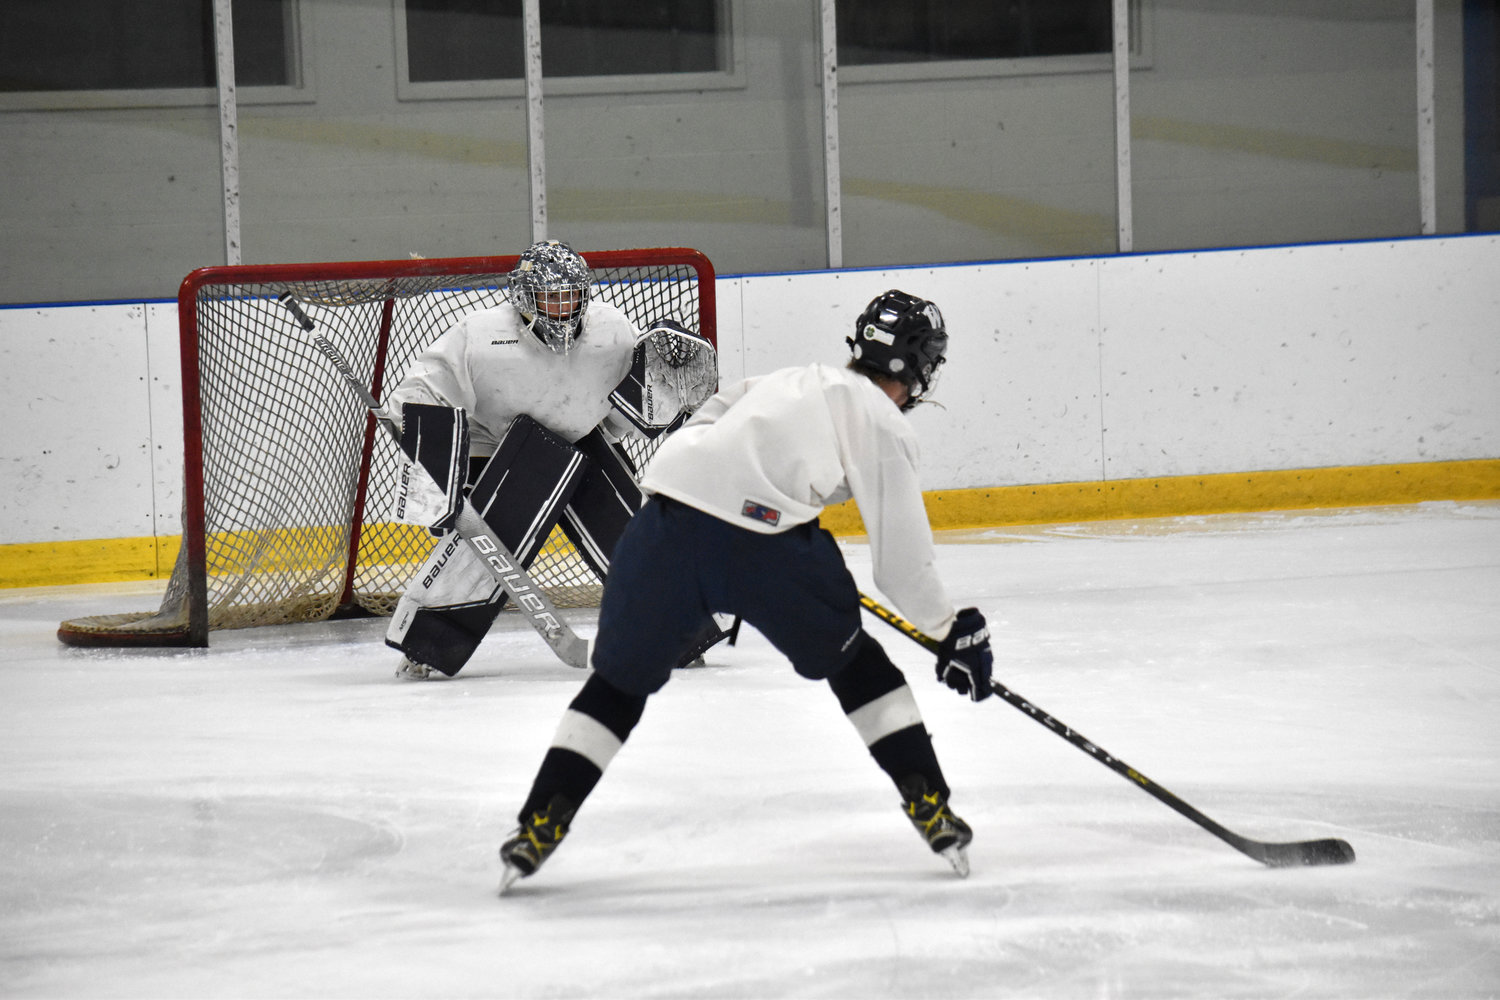 Goalie Griffin Starr prepares to face a shot during practice last week. The junior will be back in net for the boys hockey team this year.